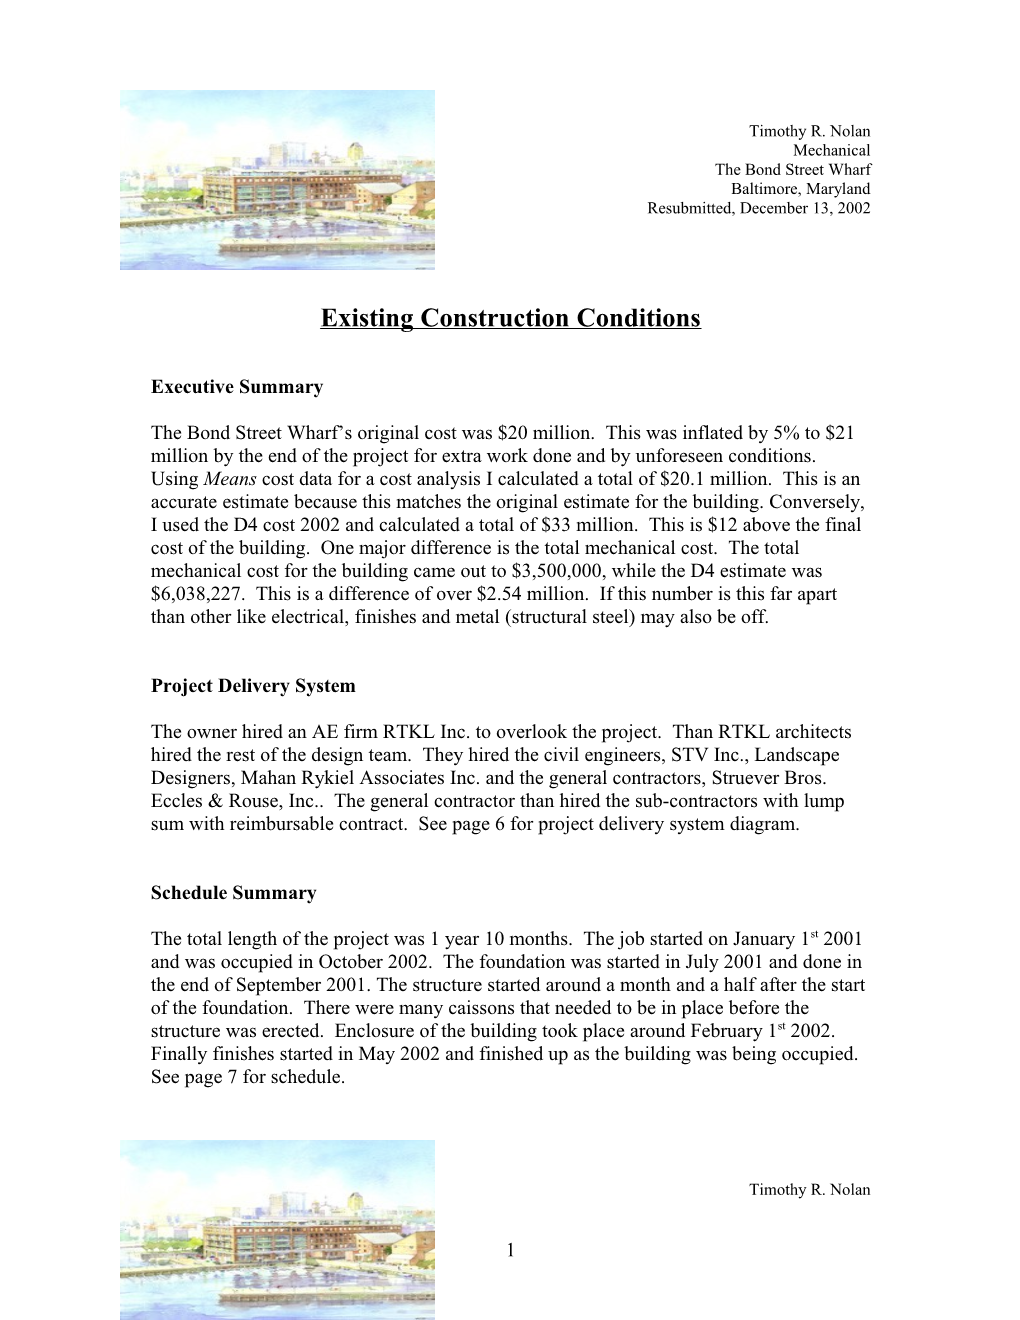 Existing Construction Conditions